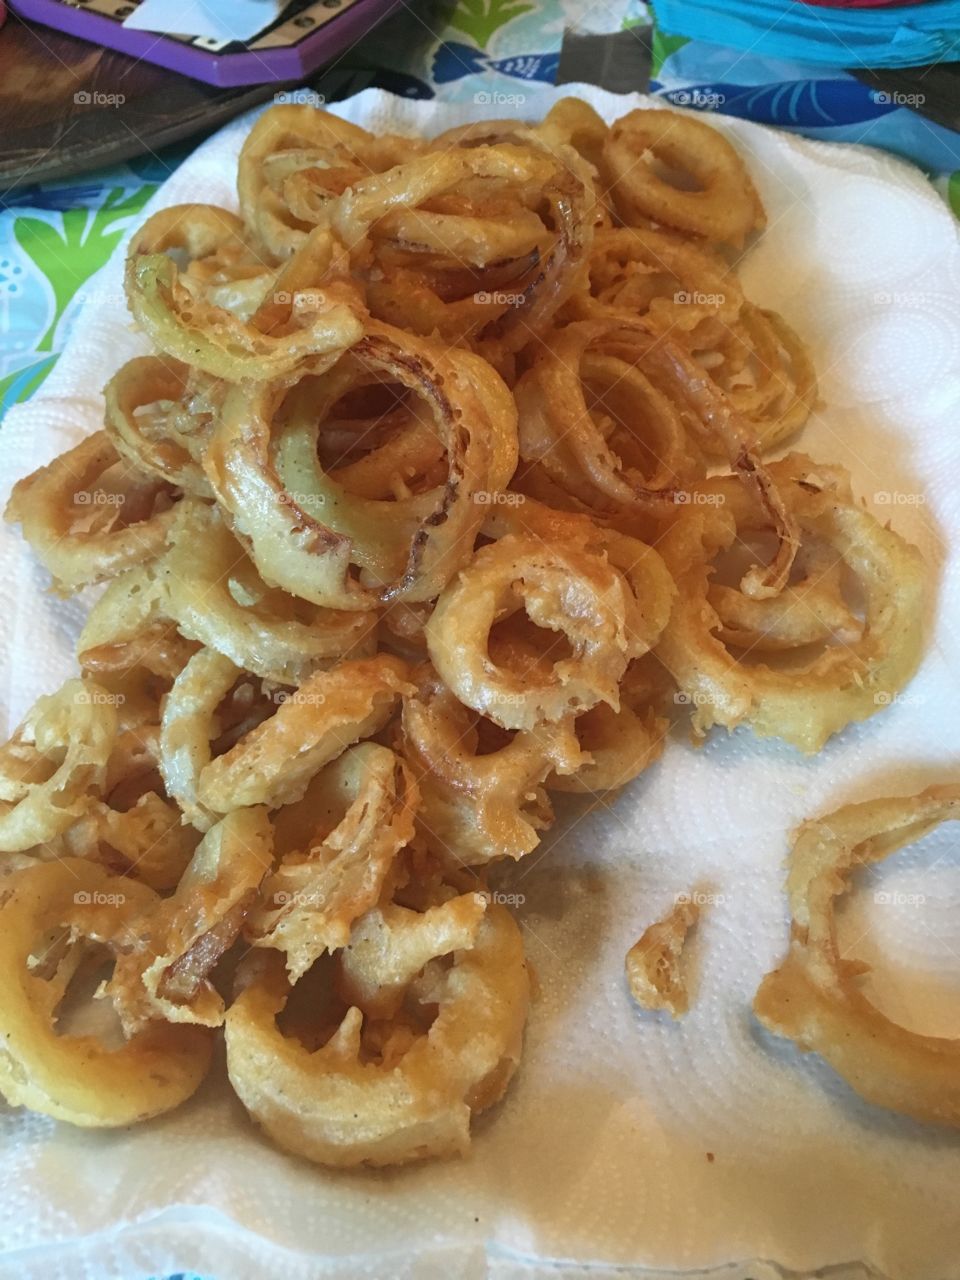 Vidalia onion rings on vacation in Burnsville NC. I brought the onions and the mix with me from Vidalia and shared the delicious snack with my family. They loved them. 😁